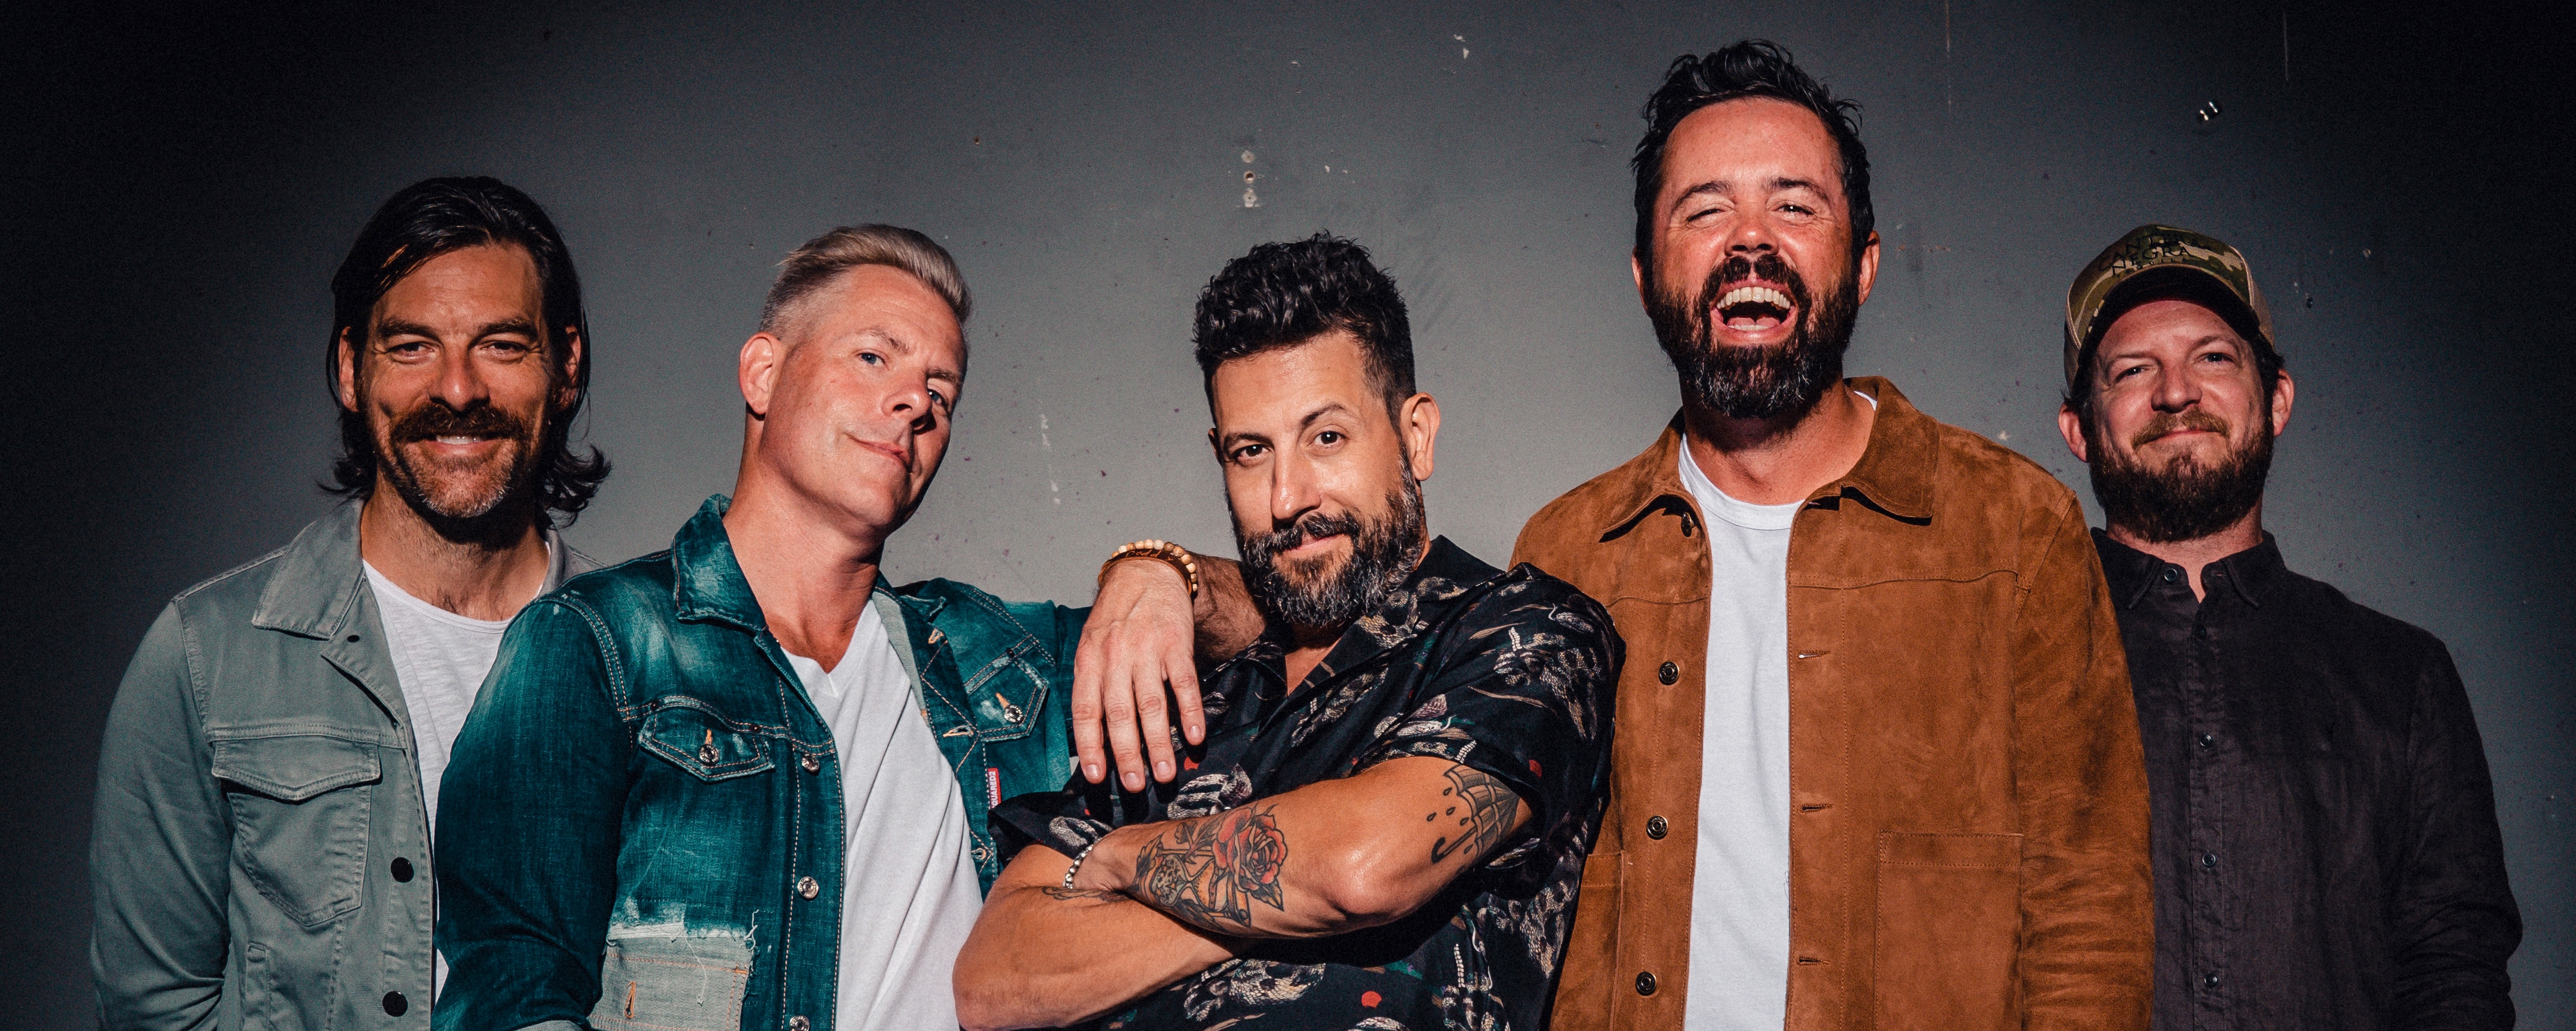 Behind the Band Name: Old Dominion